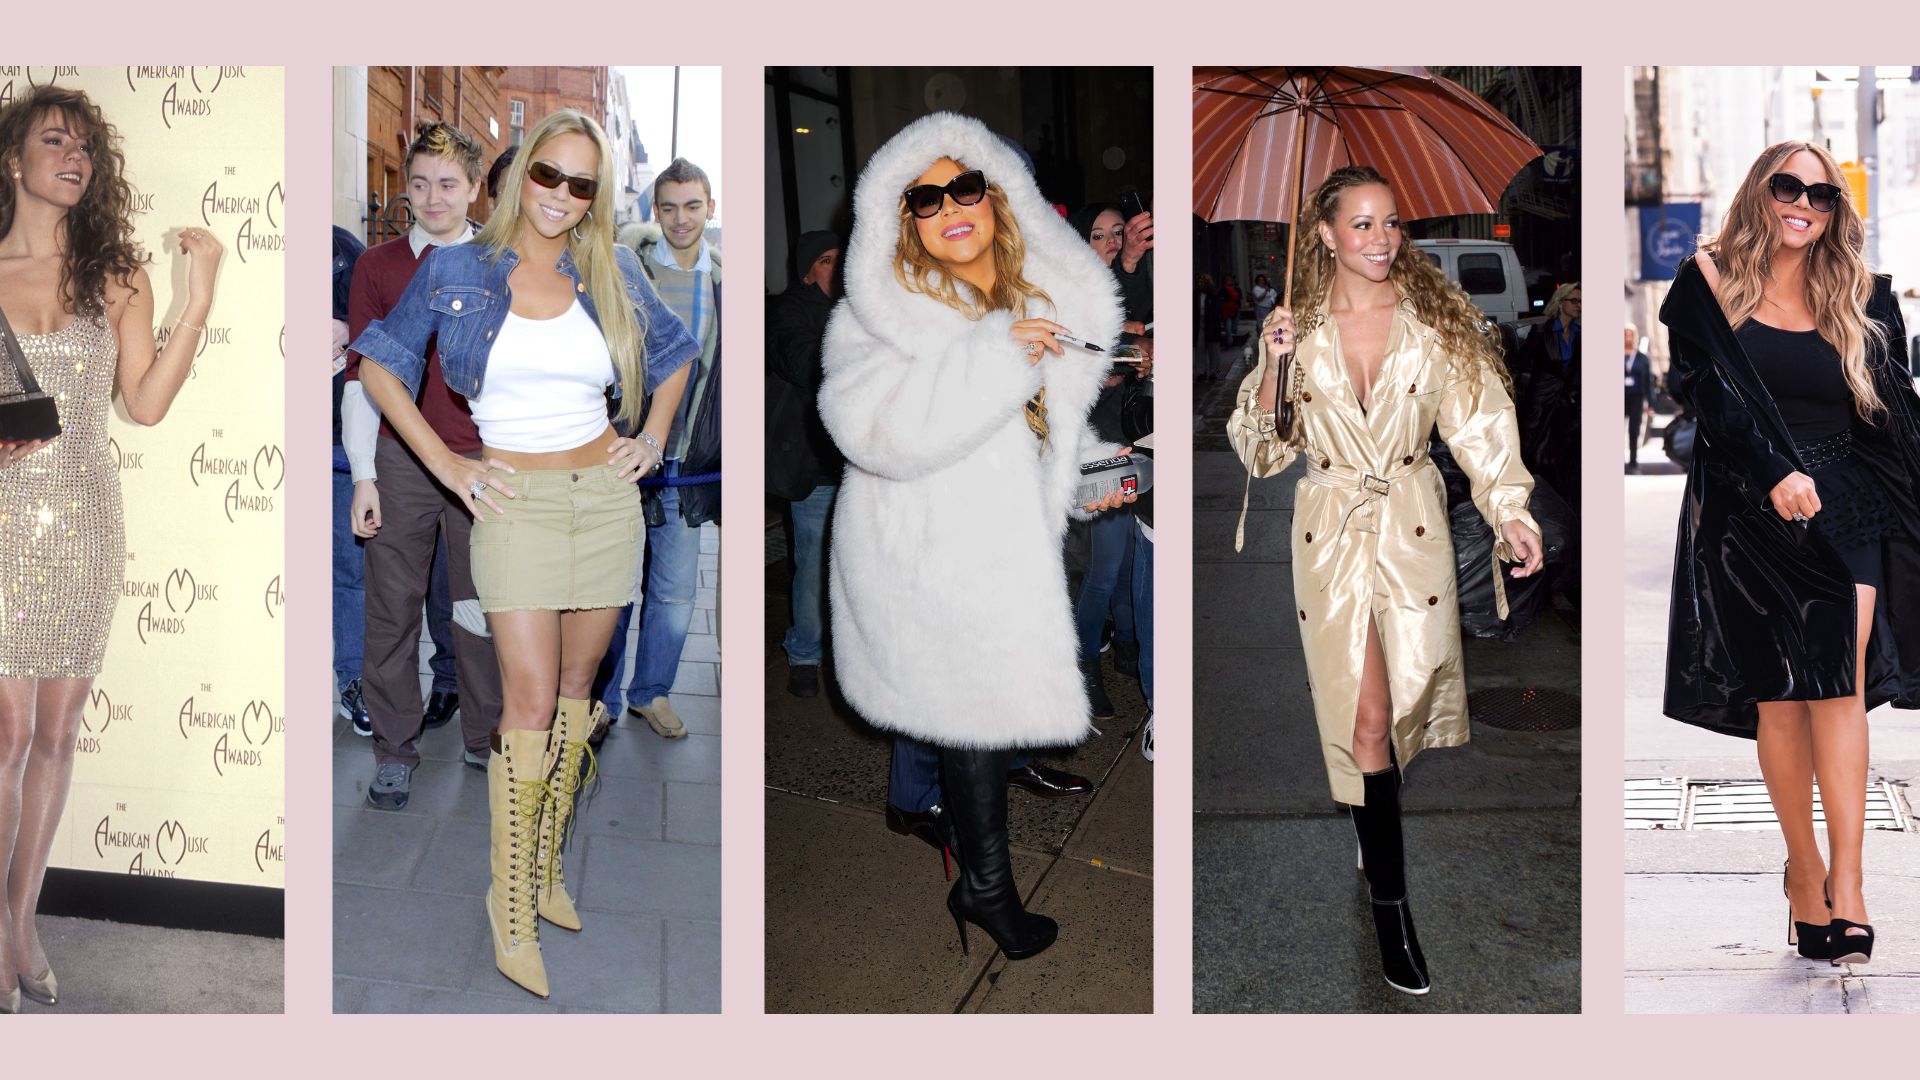 Mariah Carey claims the 2000s low-rise jeans trend was her idea